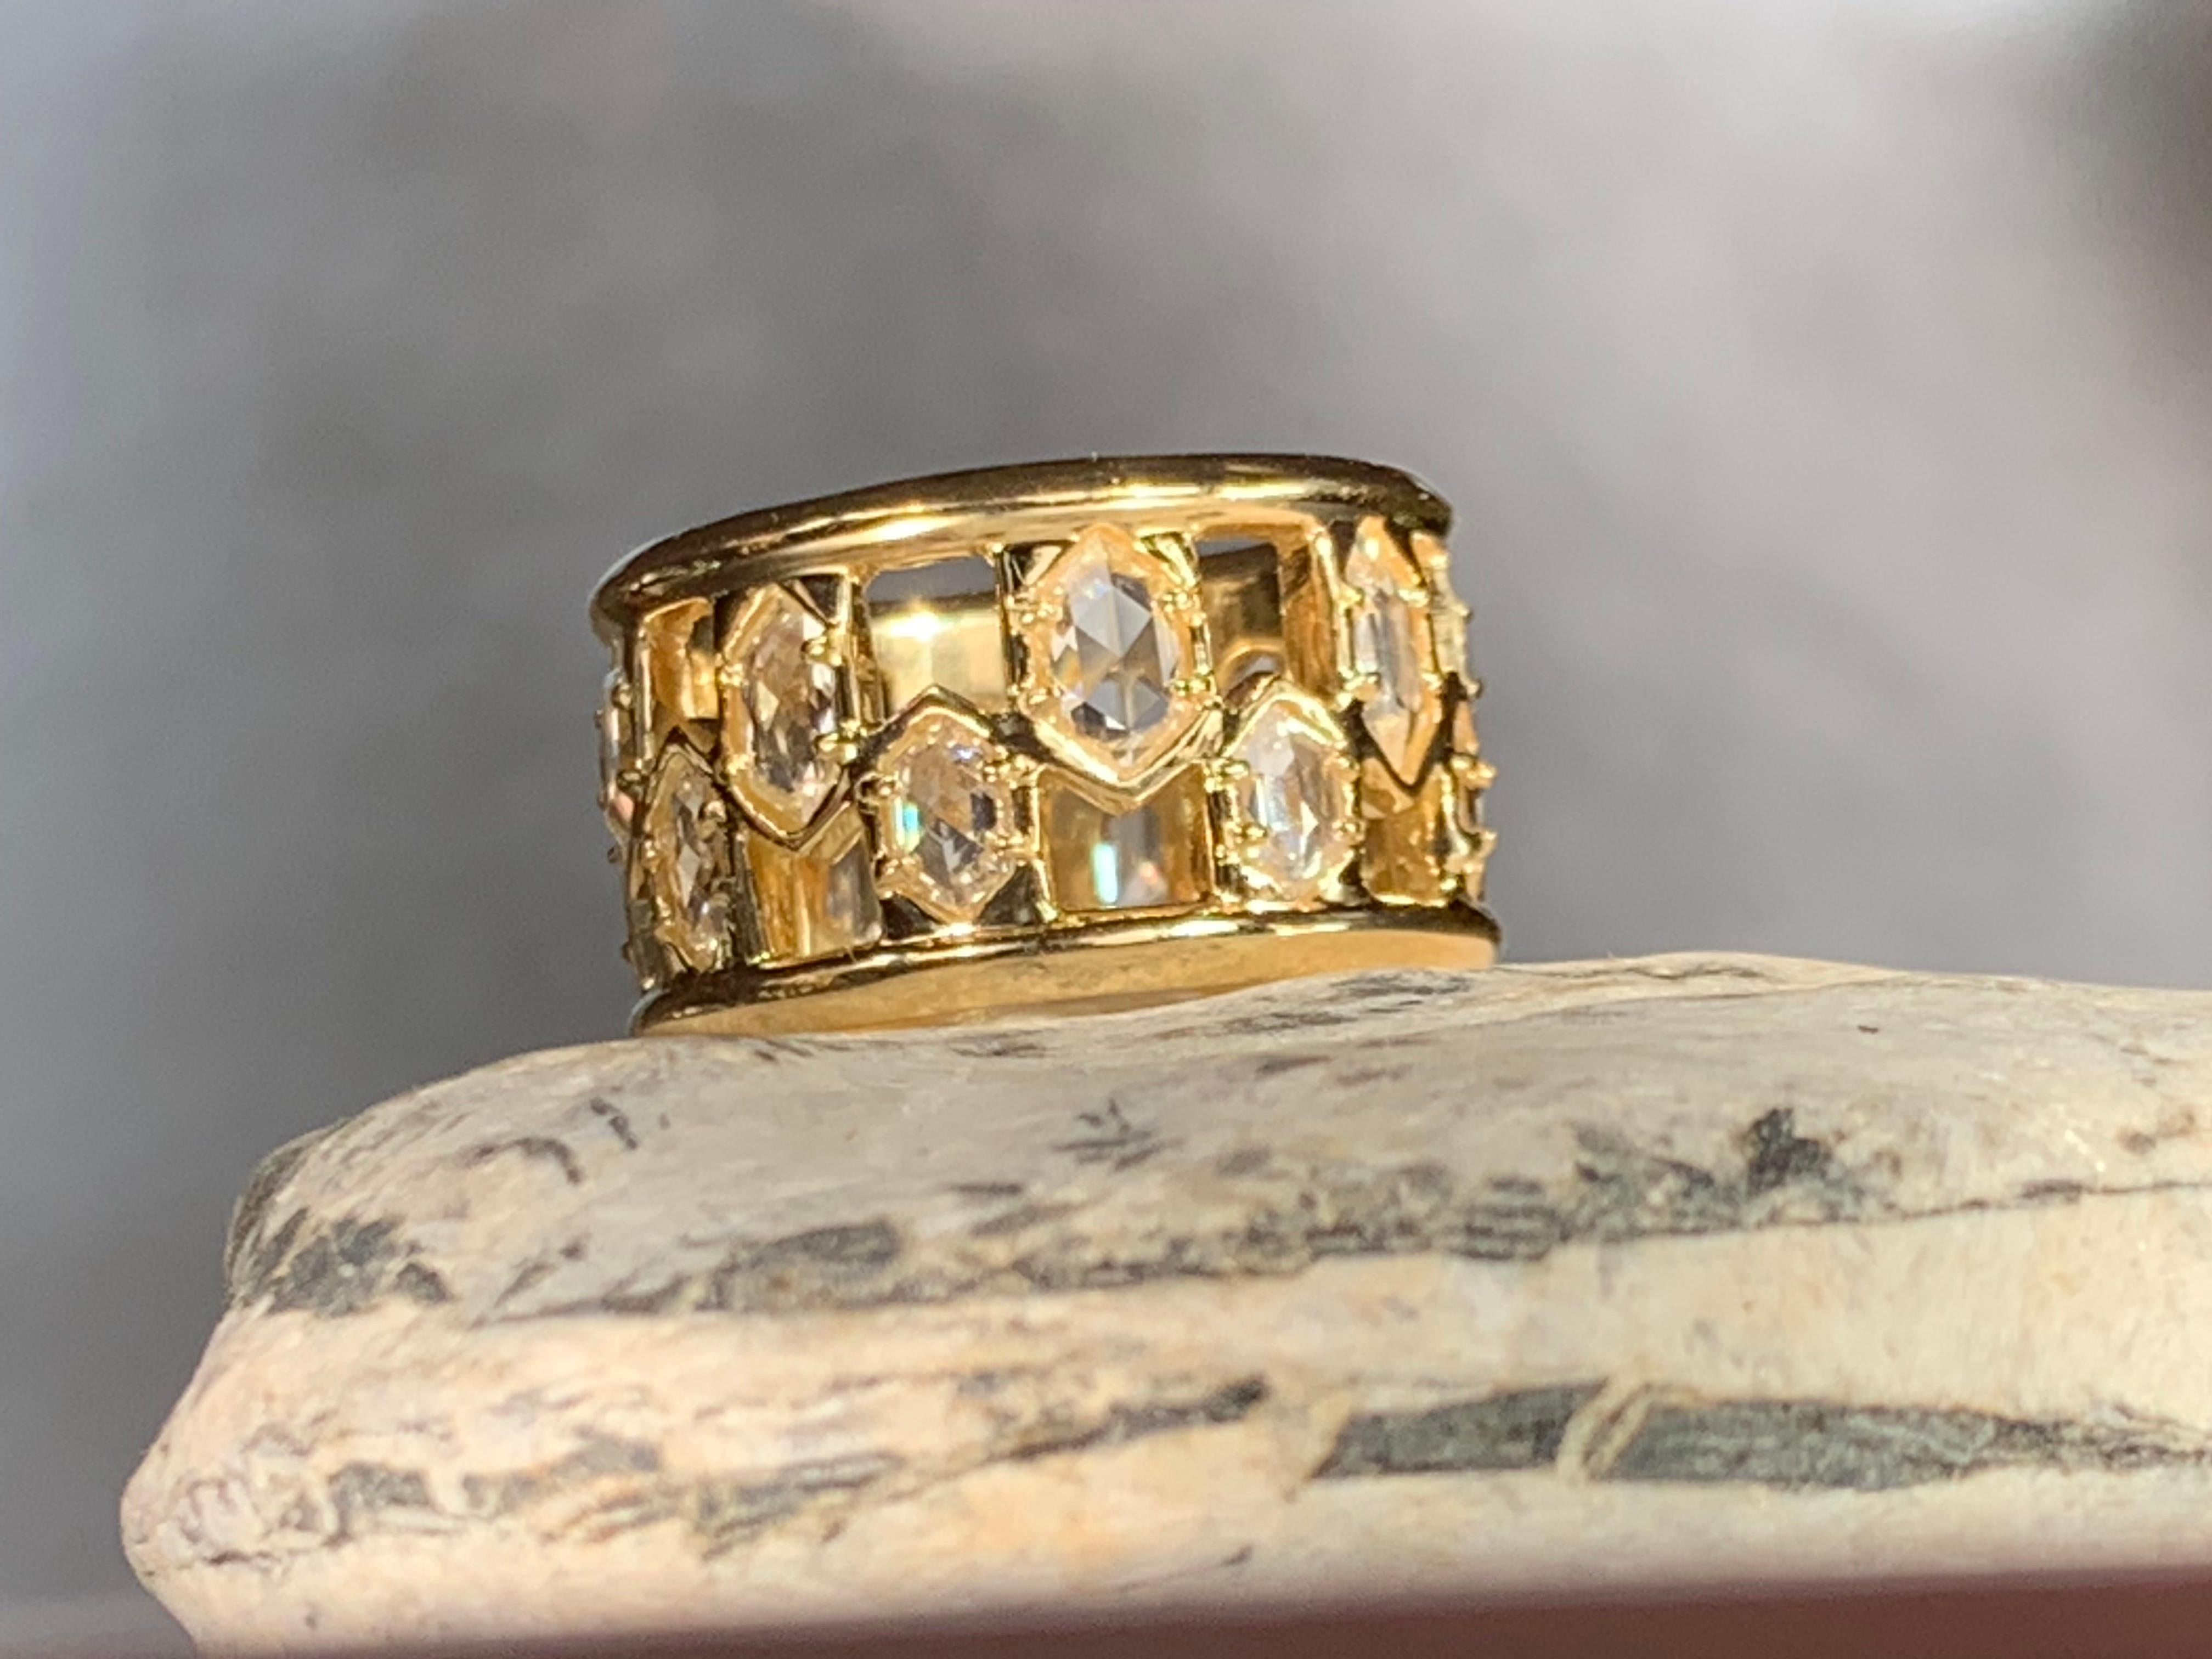 From a series of one-of-a-kind wide band rings, this 18kt yellow gold hexagonal diamond half inch wide band ring is patterned to create a spectacular light affect. We use fine quality white rose cut diamonds to heighten the sparkle.
This style of